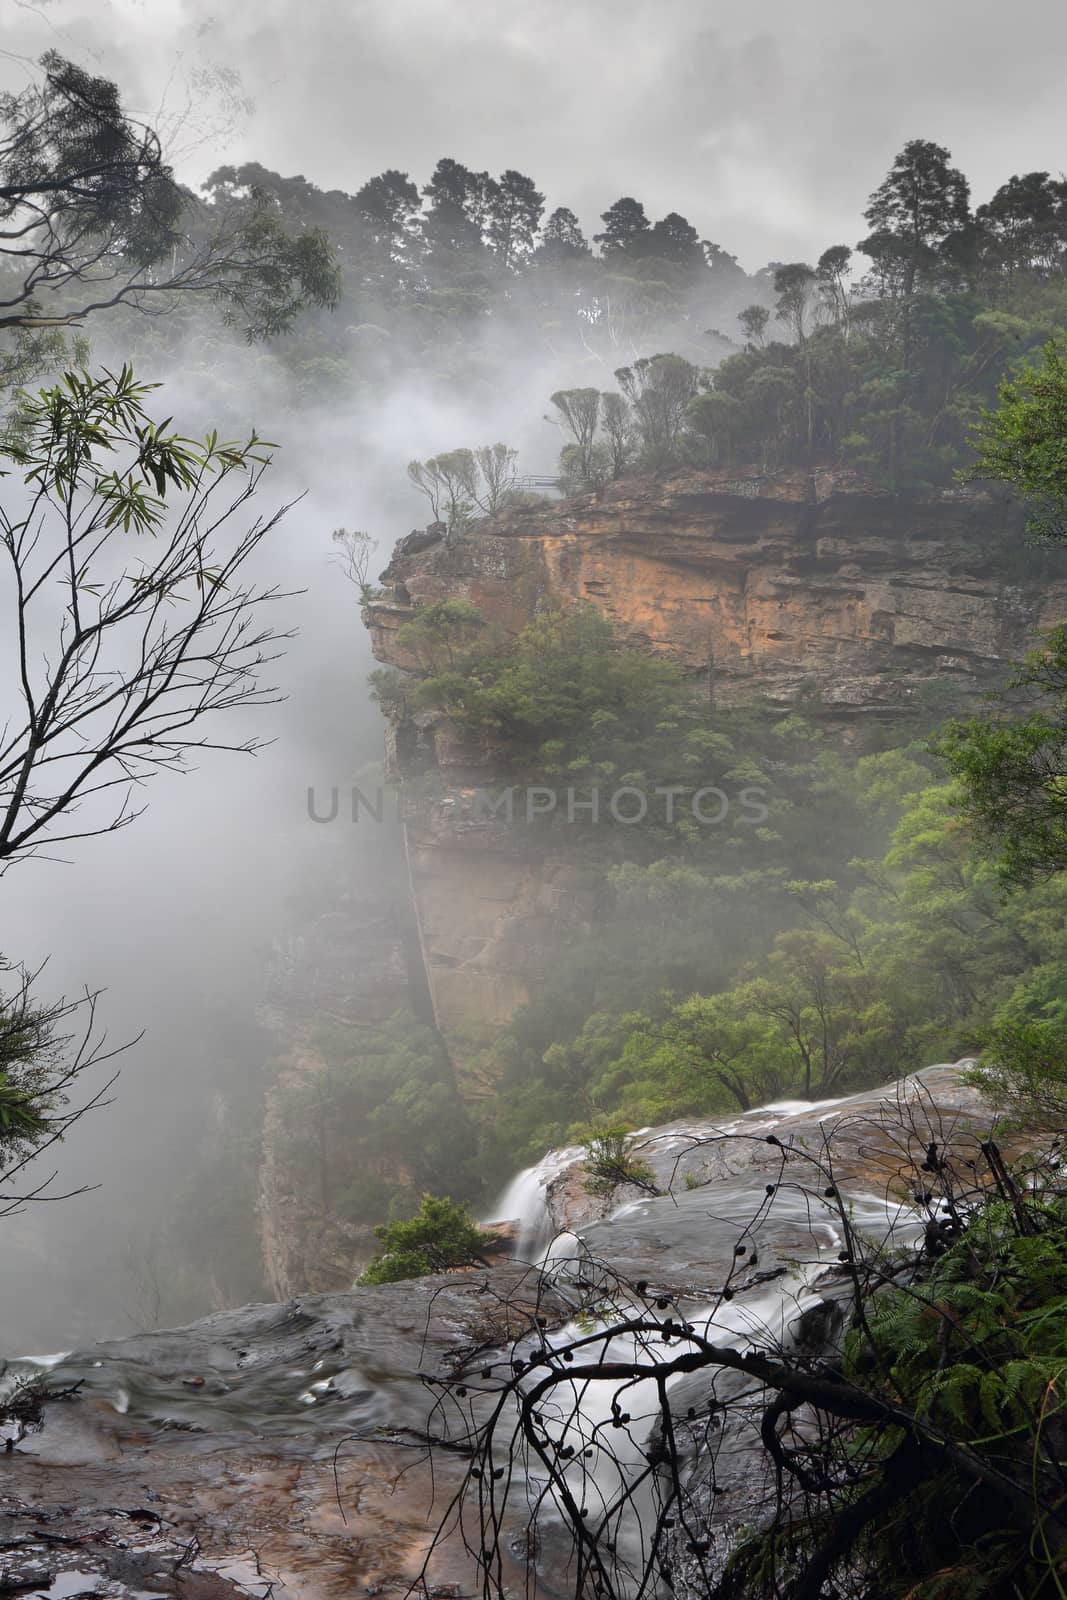 Views of the water as it passes over the ledge before the large drop into the valley below, this section known as Upper Wentworth Falls.  